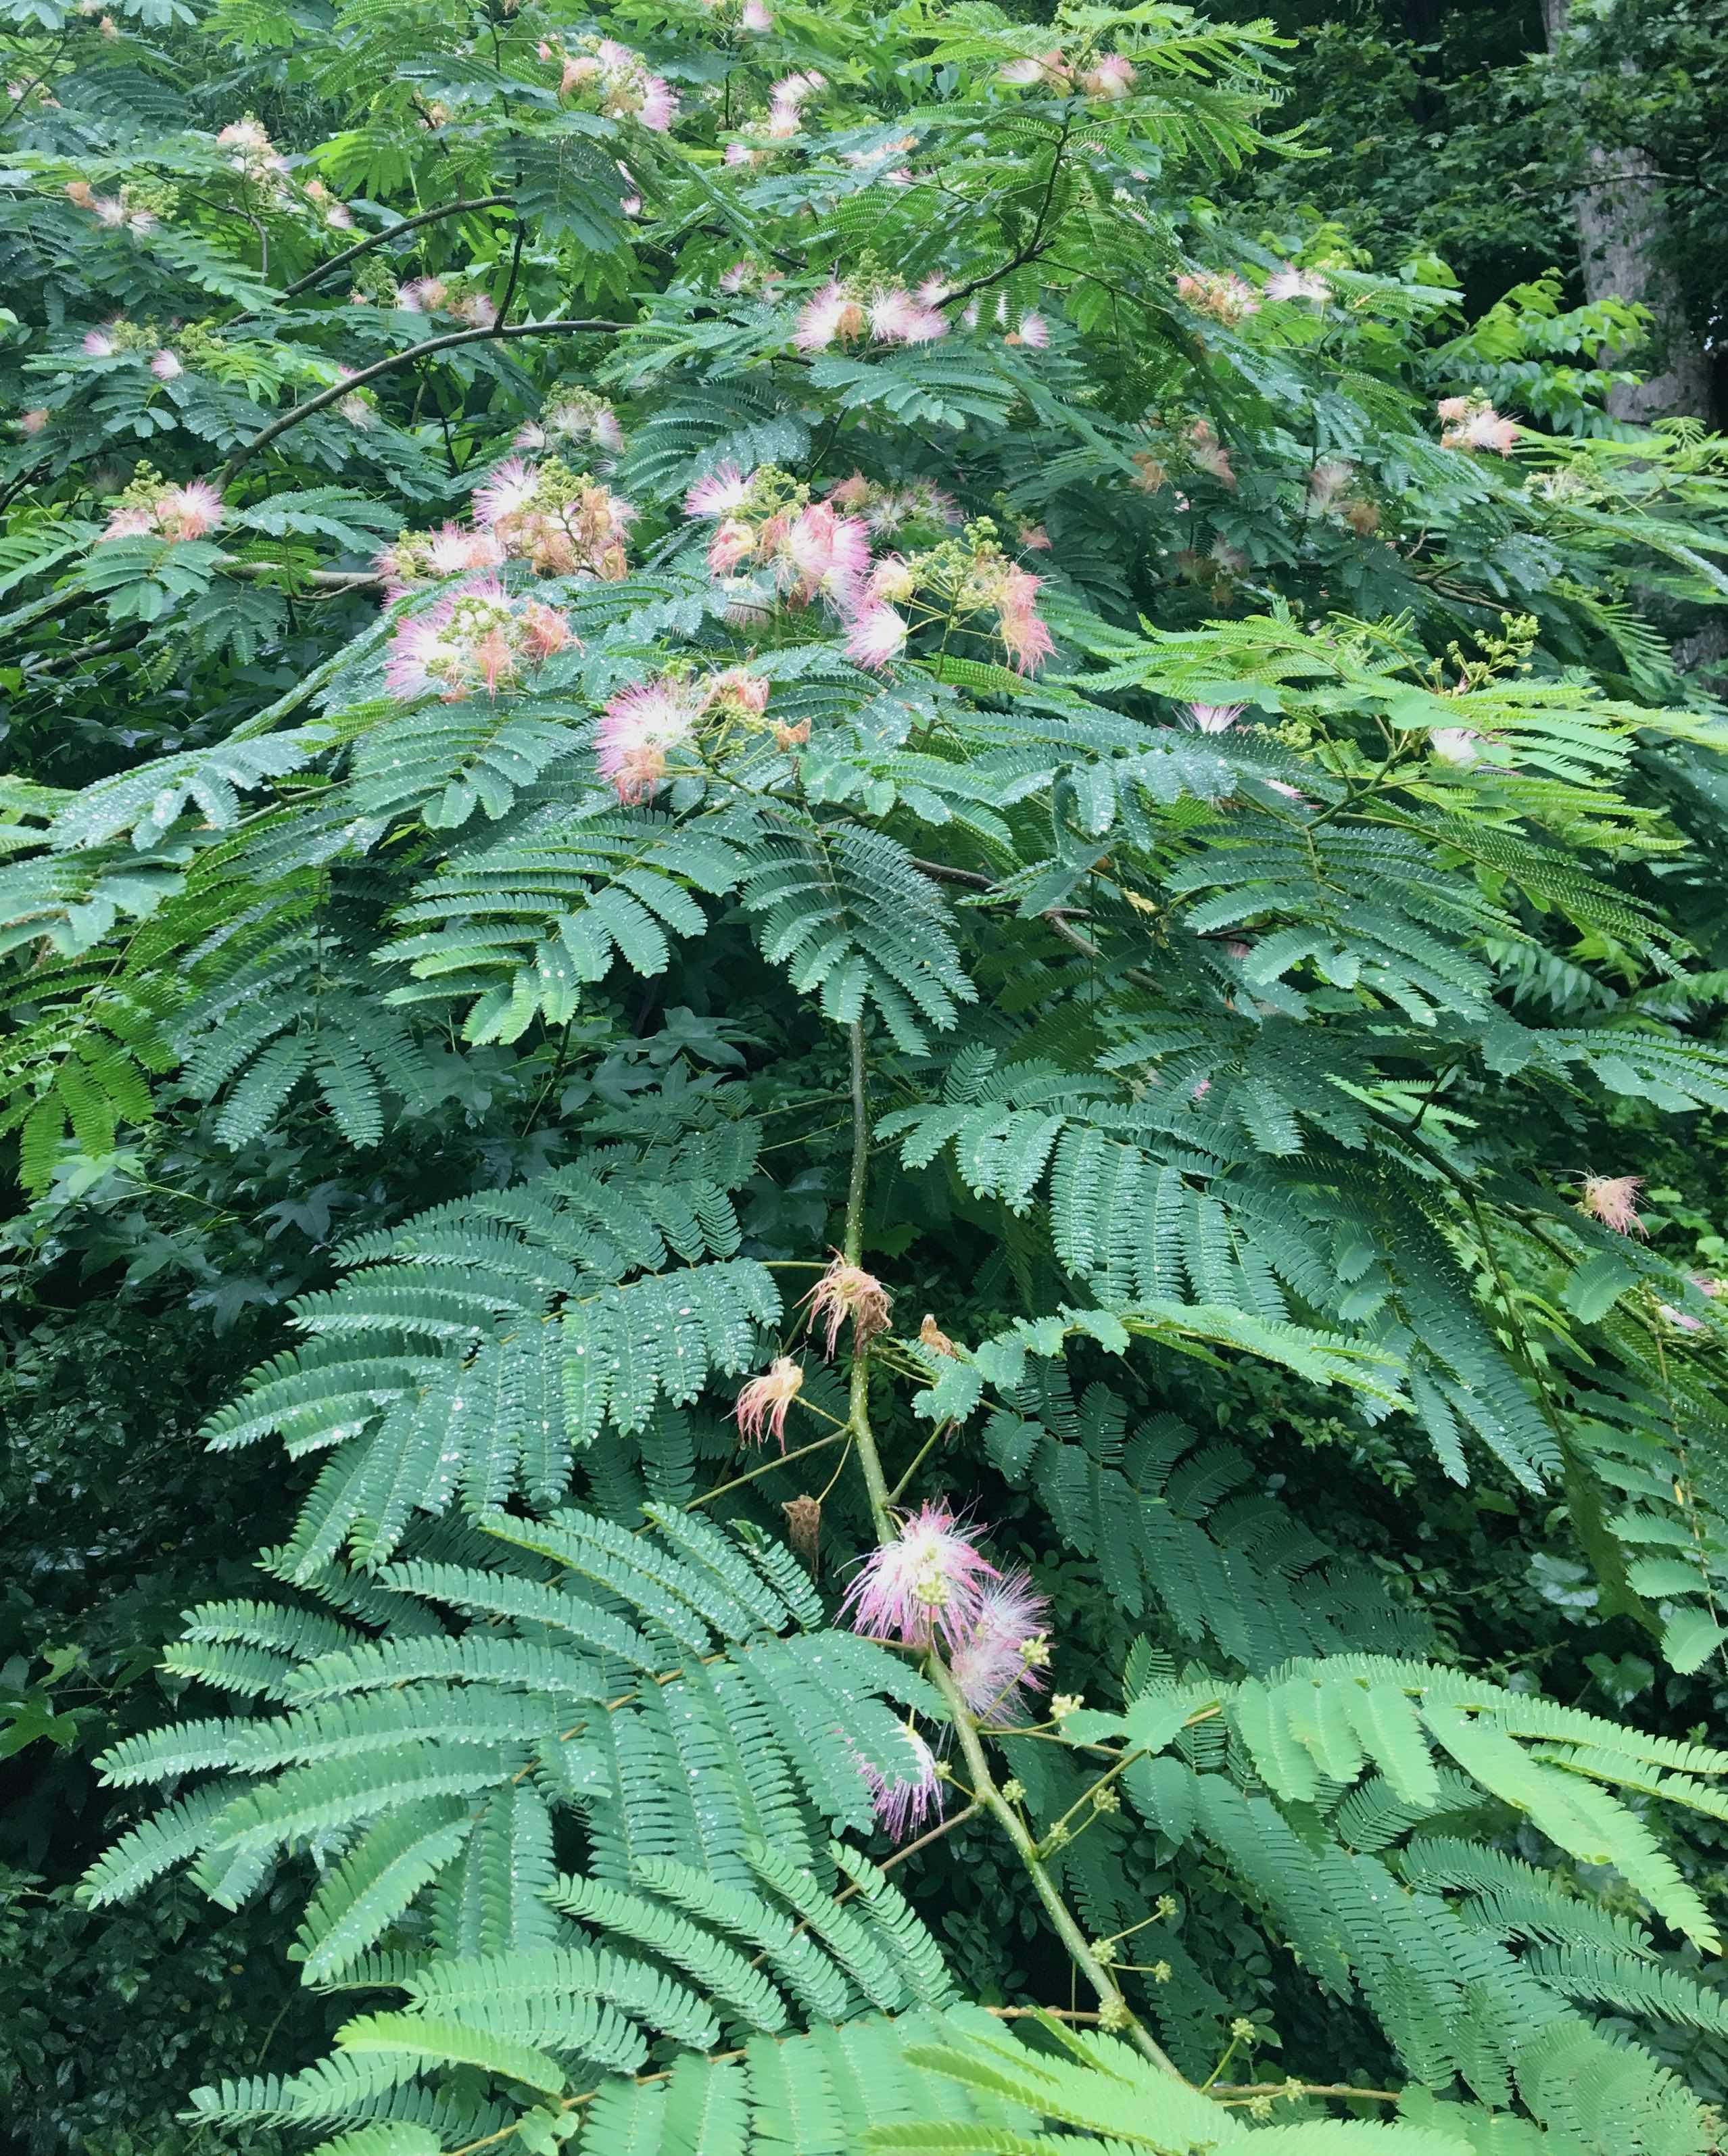 The Scientific Name is Albizia julibrissin. You will likely hear them called Mimosa, Silk Tree. This picture shows the Feathery twice-compound leaves, with 6 to 16 main leaflets and numerous tiny (<1/2